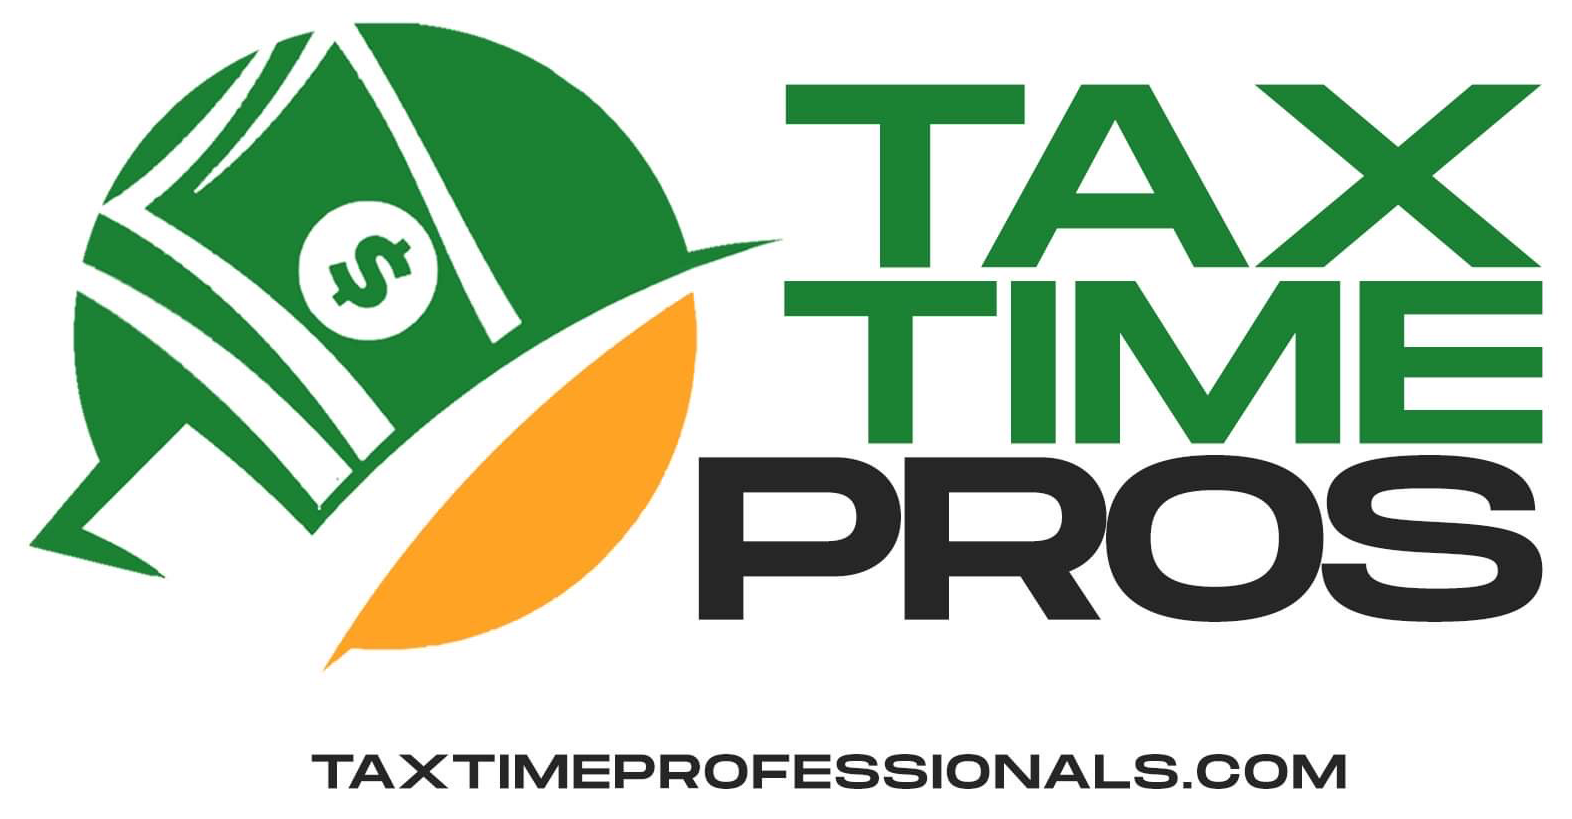 Tax Time Professionals